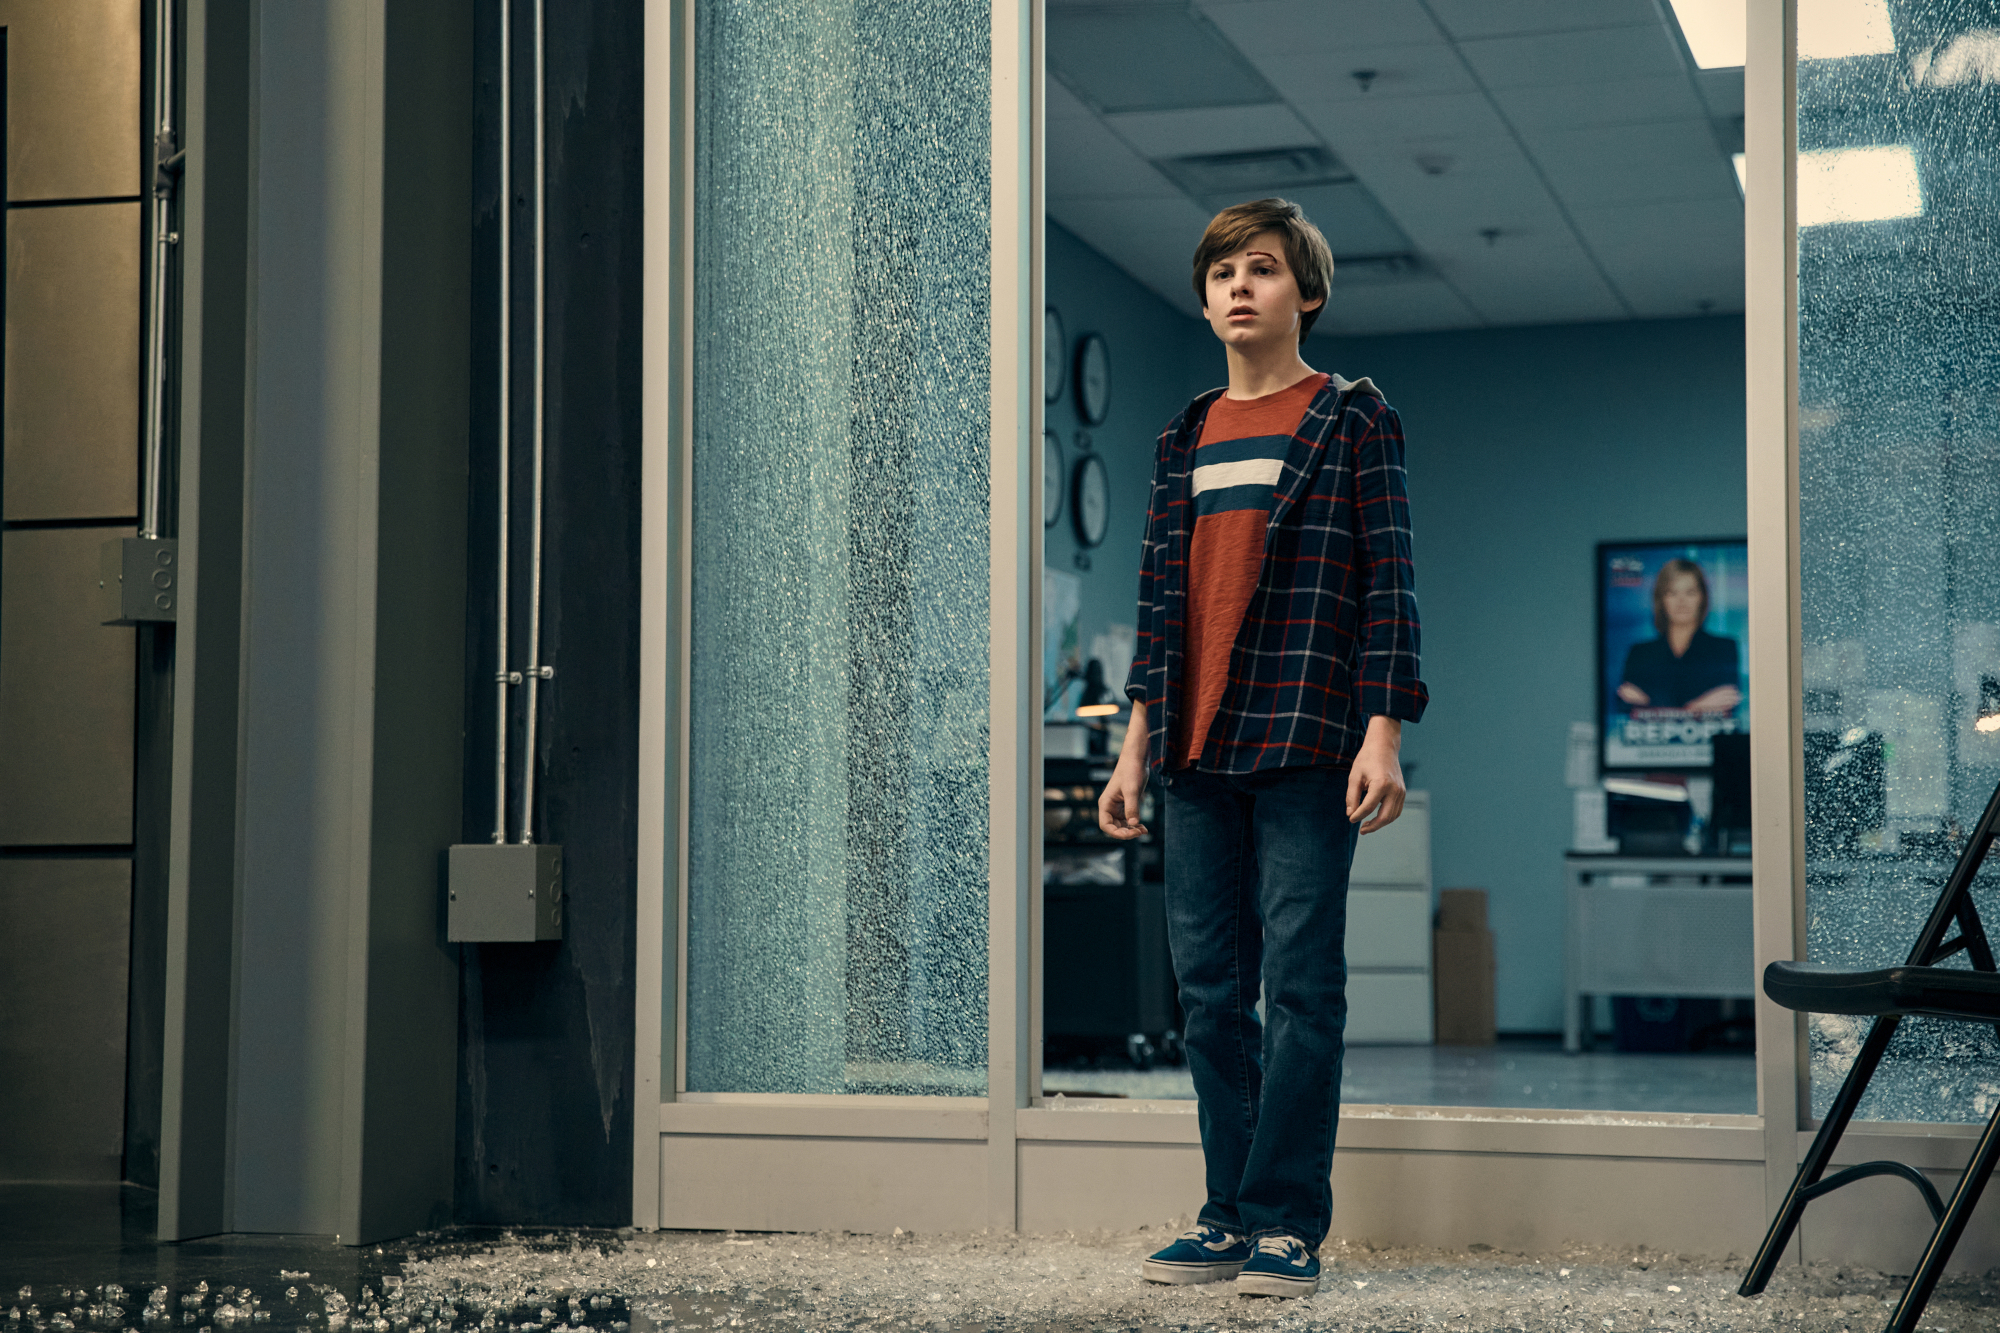 Cameron Crovetti as Ryan in 'The Boys' Season 3. He's standing in front of a broken glass wall and looks hesitant.